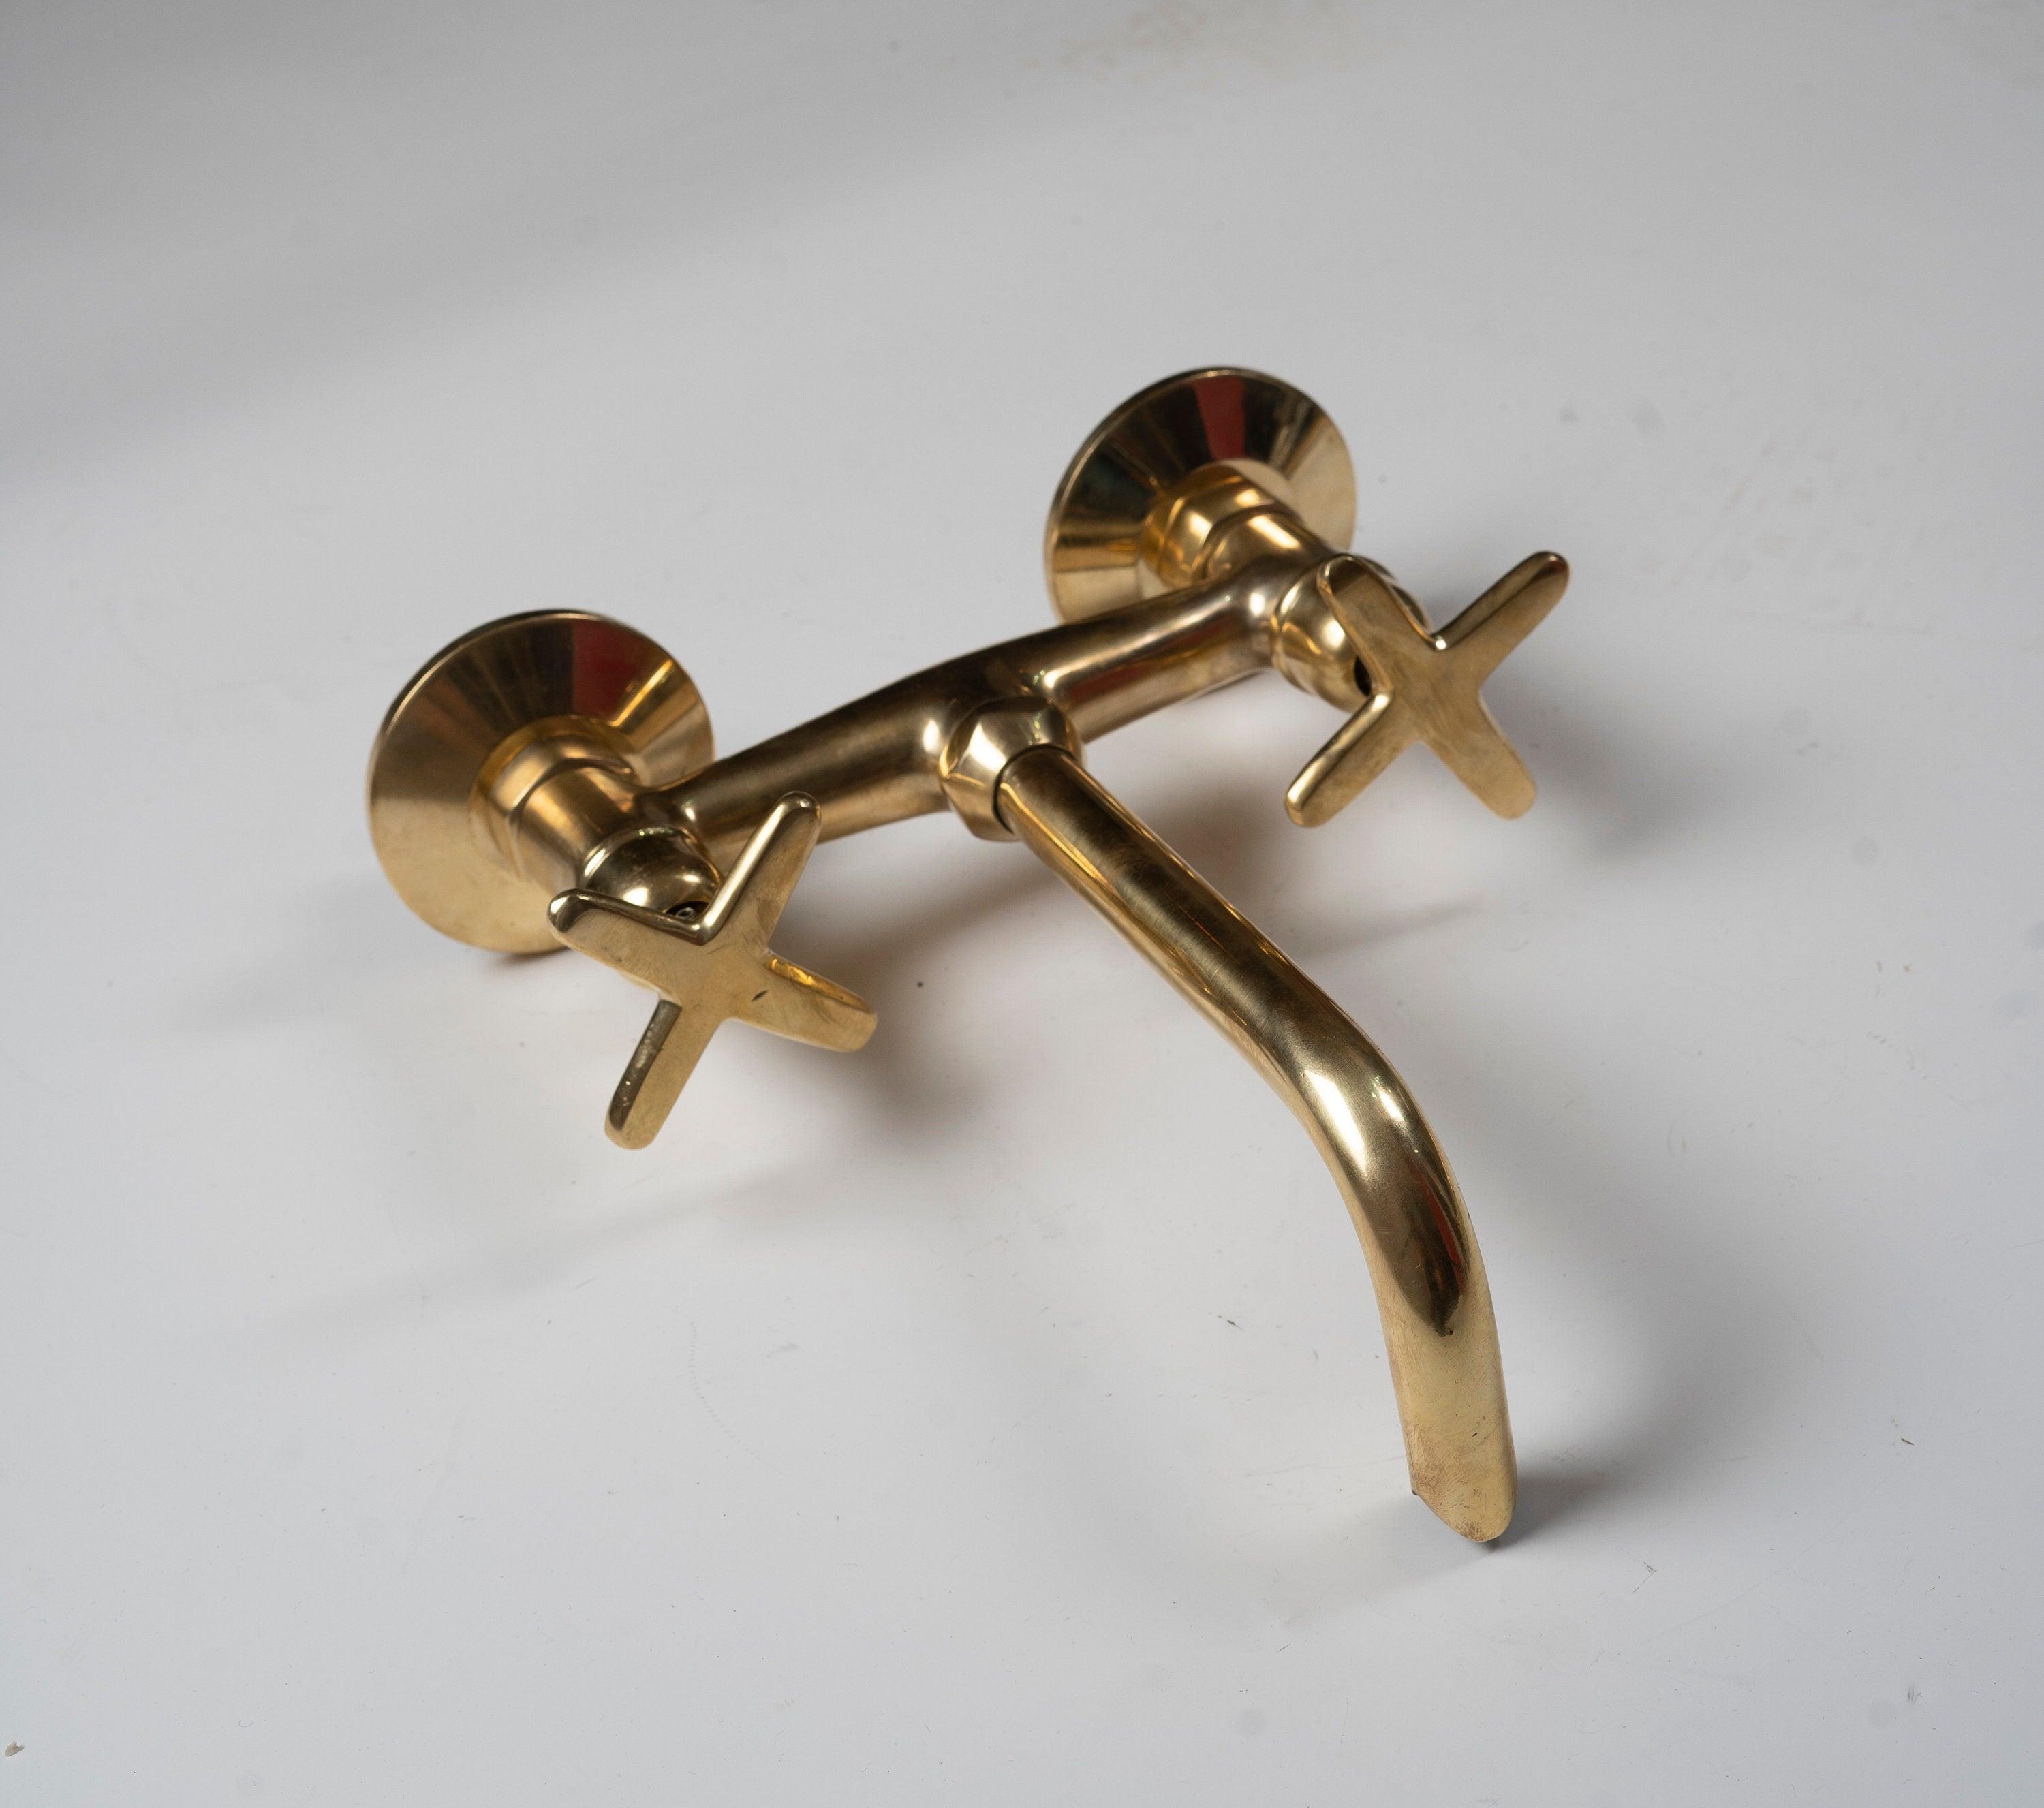 Unlacquered Brass Bathroom Tub Wall Mounted Faucet Zayian